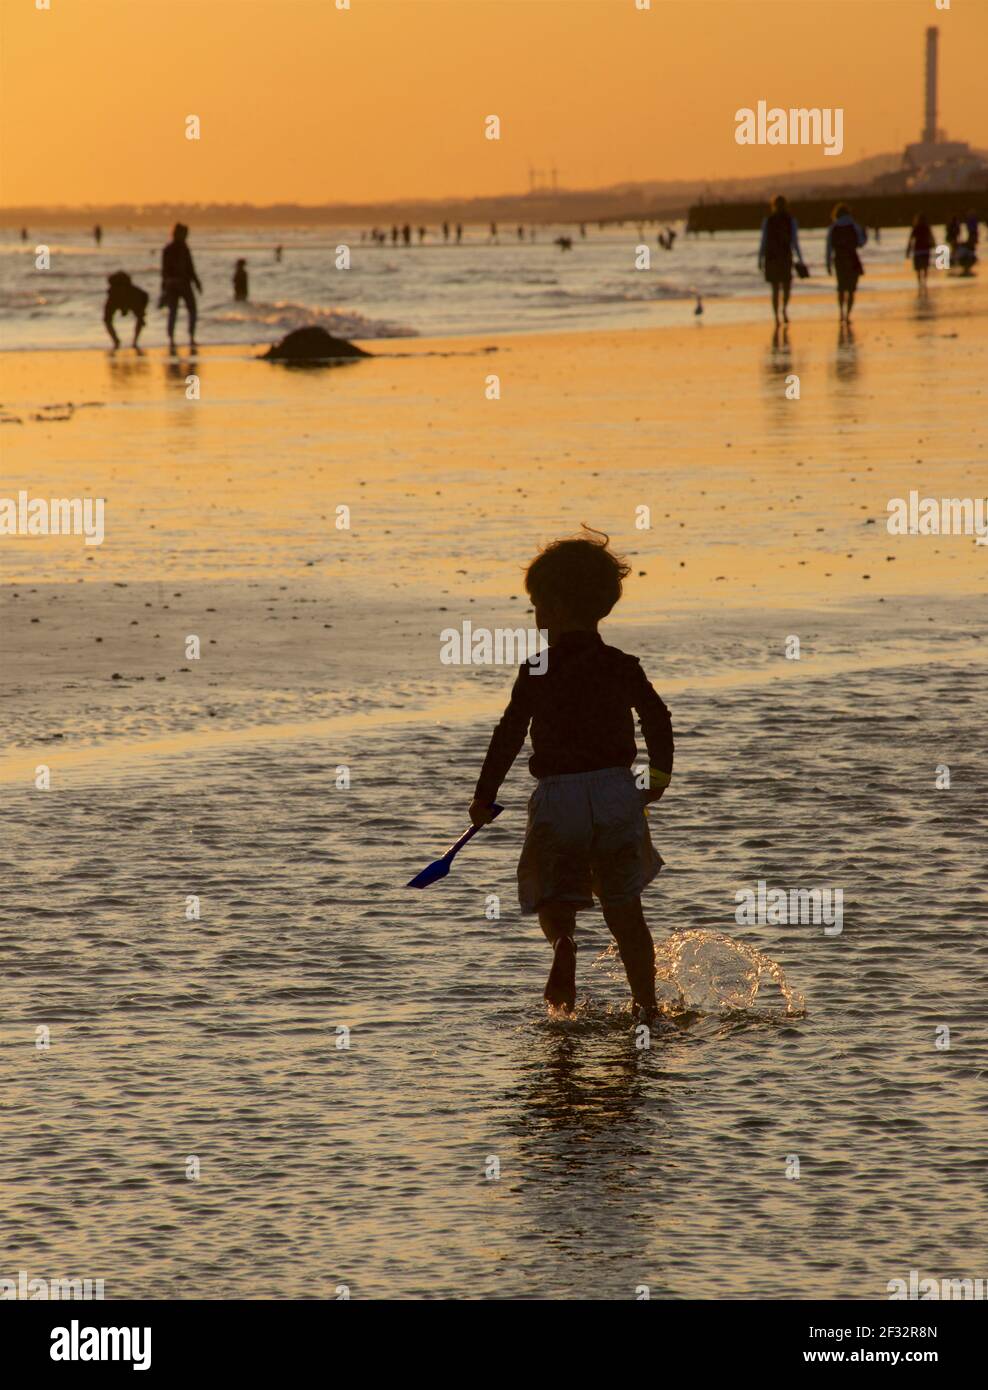 Brighton and Hove beach at low tide. Silhouette of paddling toddler on the sand with spade at sunset. East Sussex, England Stock Photo